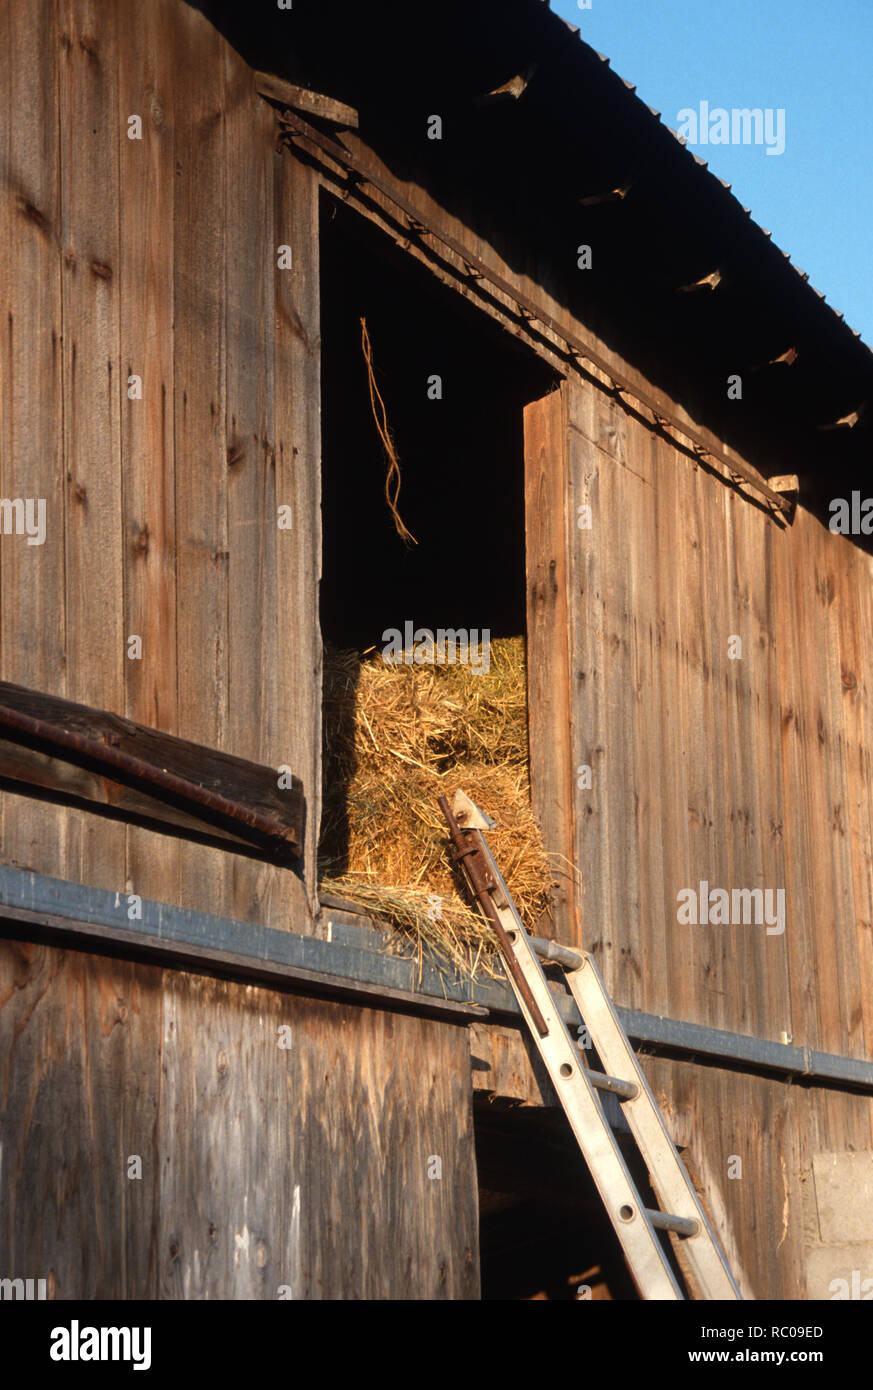 Looking up into a barn's hayloft, USA Stock Photo